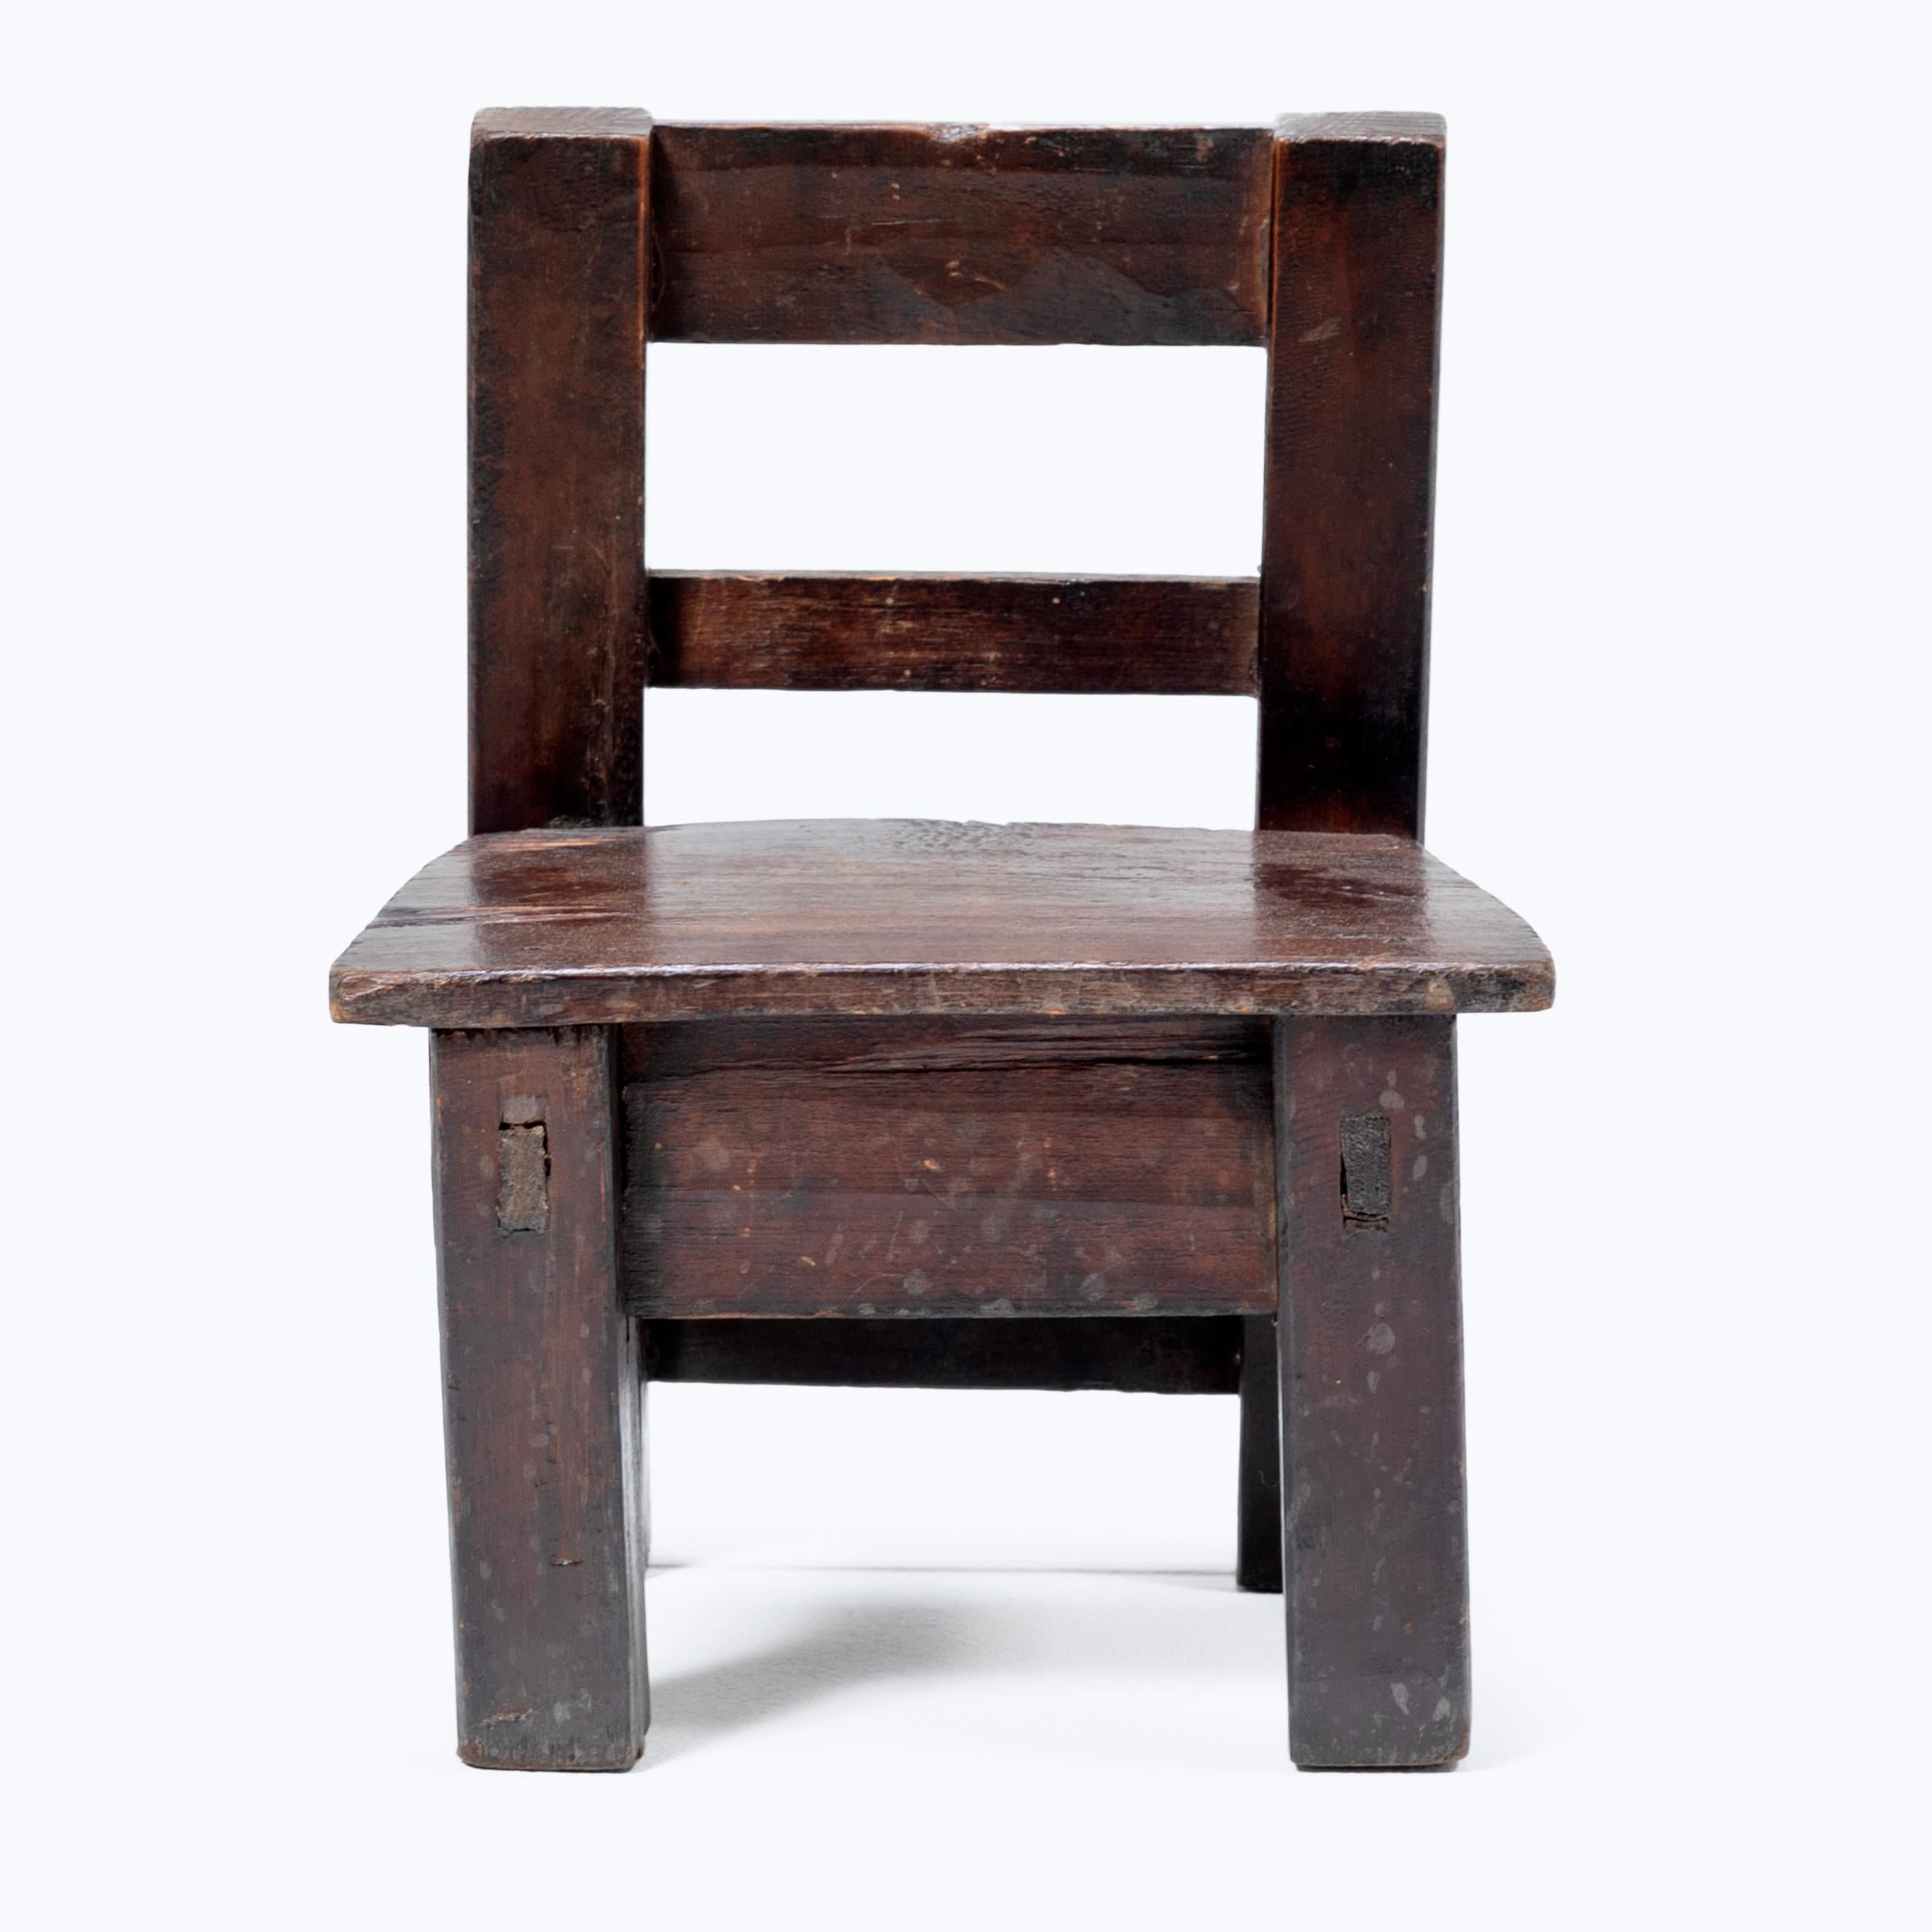 Crafted in the early 20th century, this petite Guatemalan children's chair charms with its playful asymmetry and richly textured surface. Influenced by Spanish Colonial furniture design, the angular chair has a slatted back and tapered seat resting